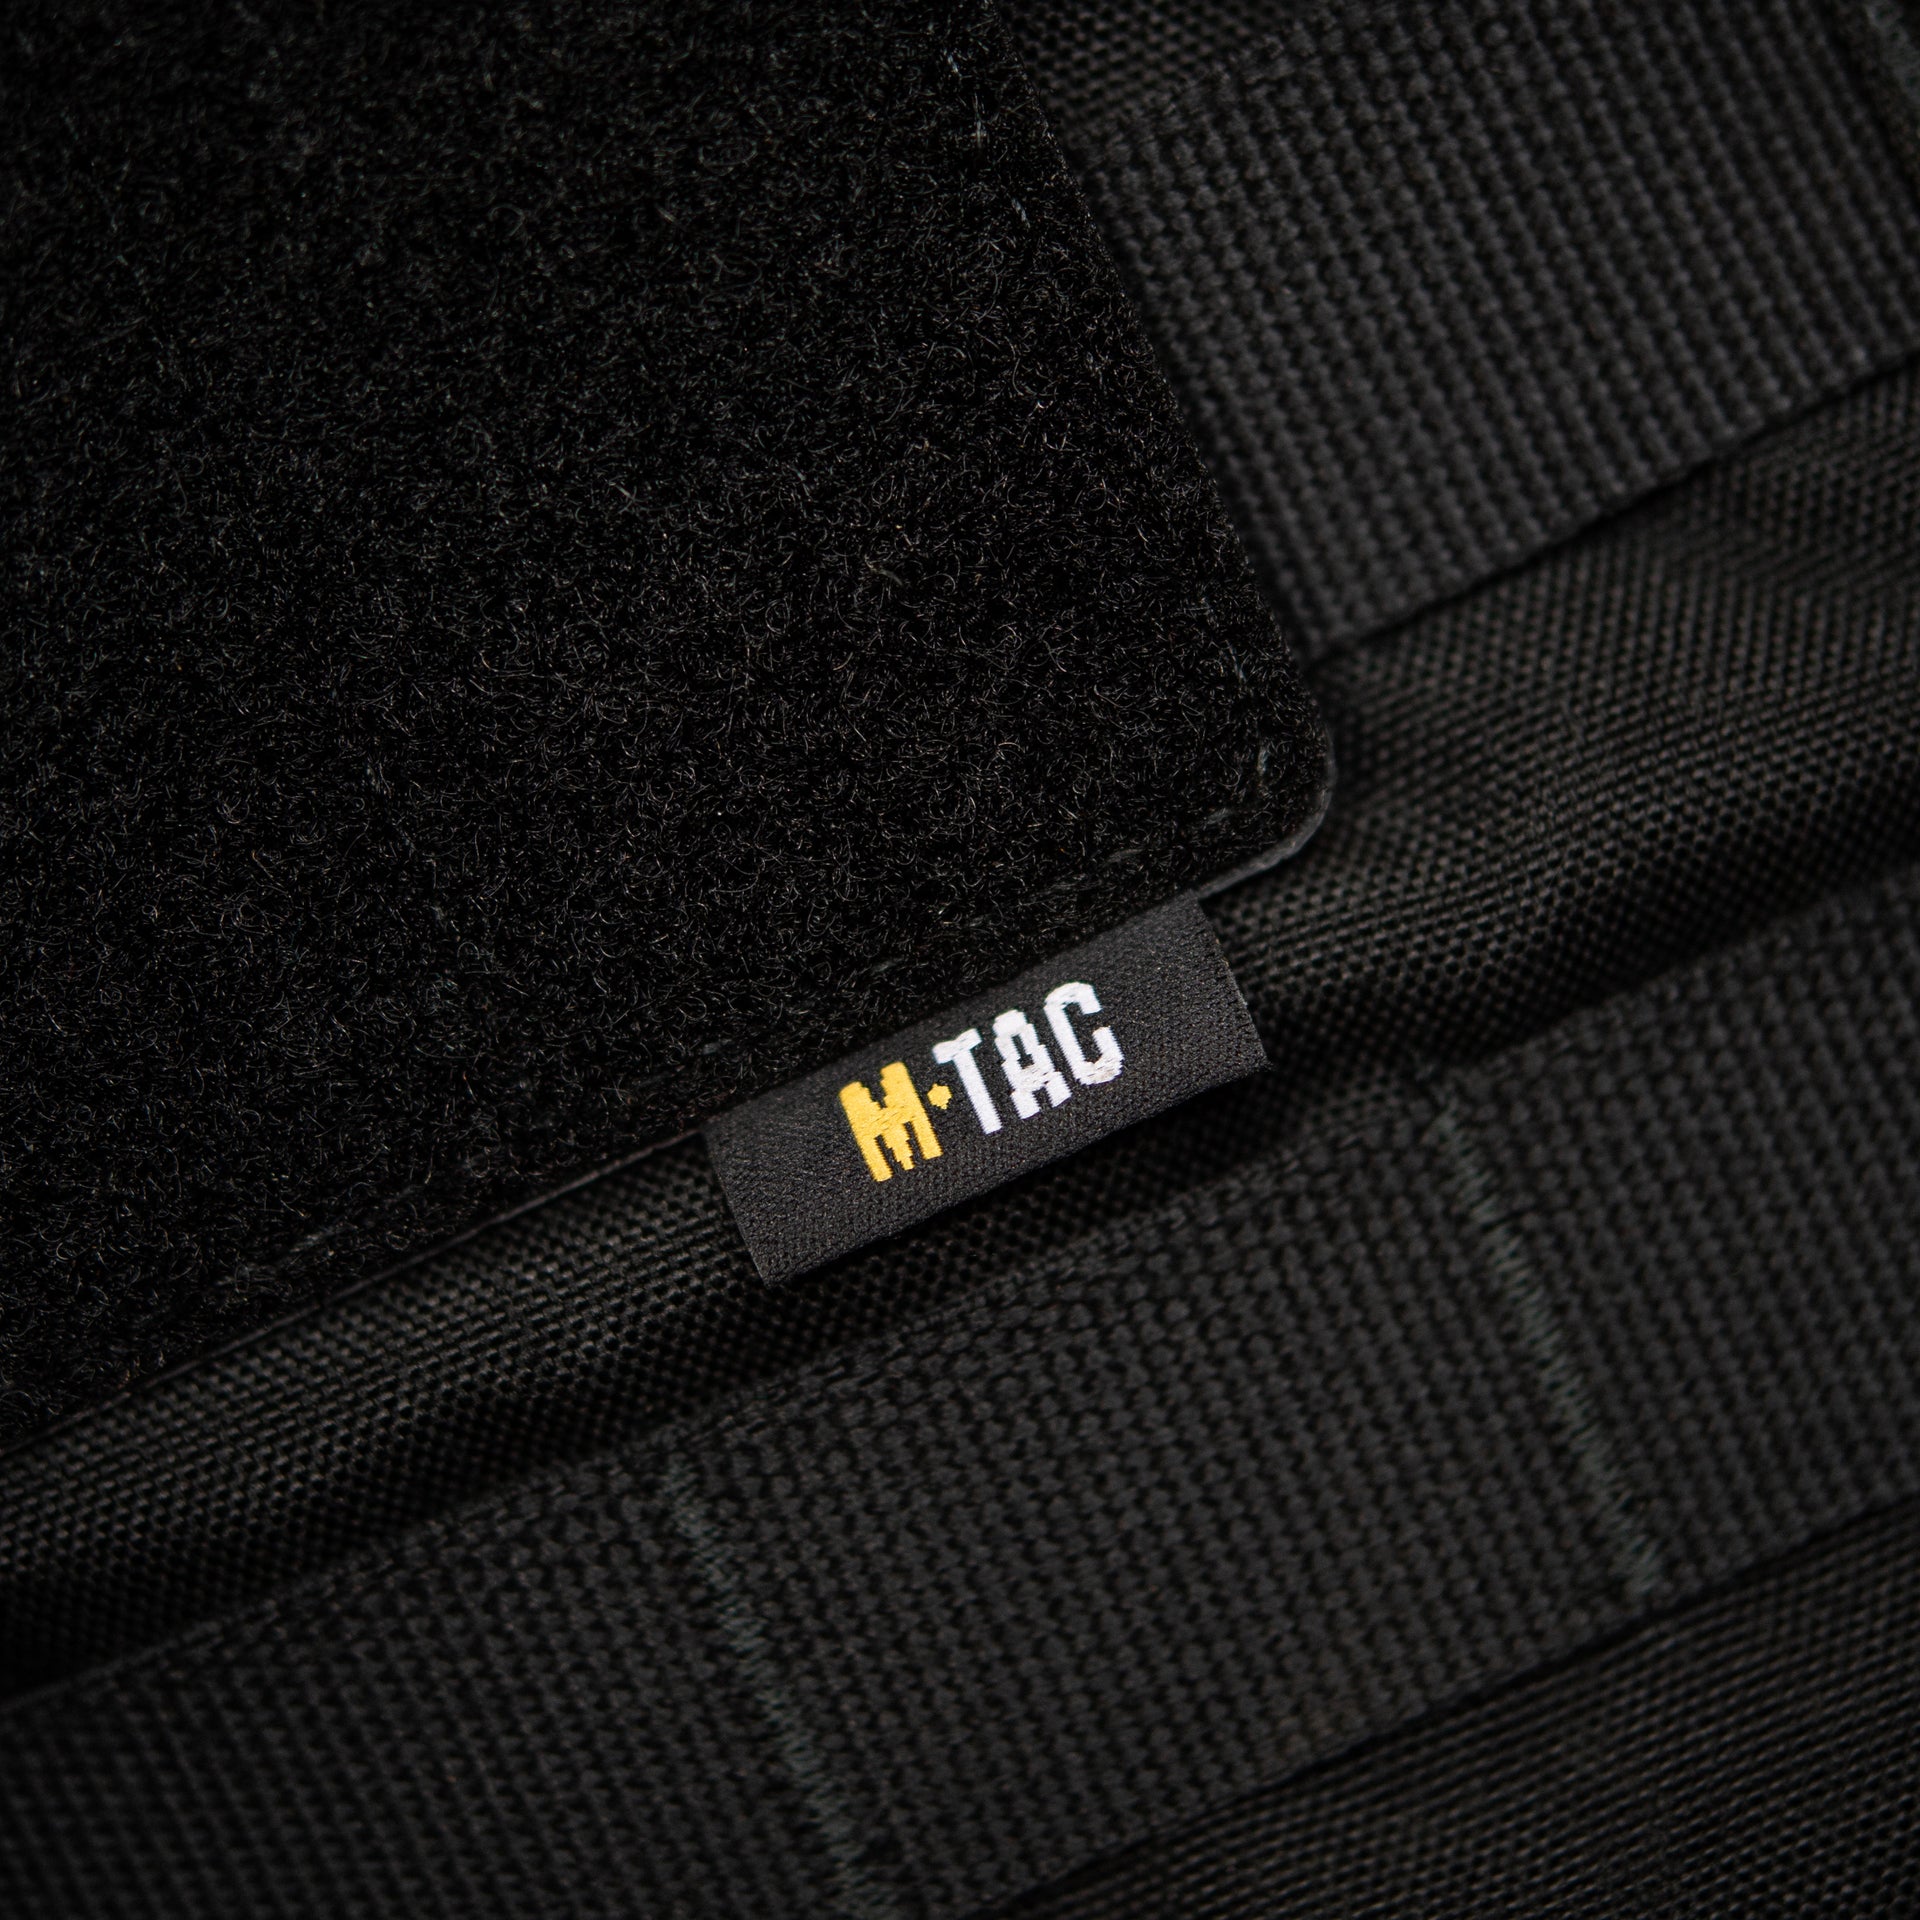 M-Tac Hook and Loop Tactical Morale Patches Board Molle Attachment 4.5 x  3.5 (Black)